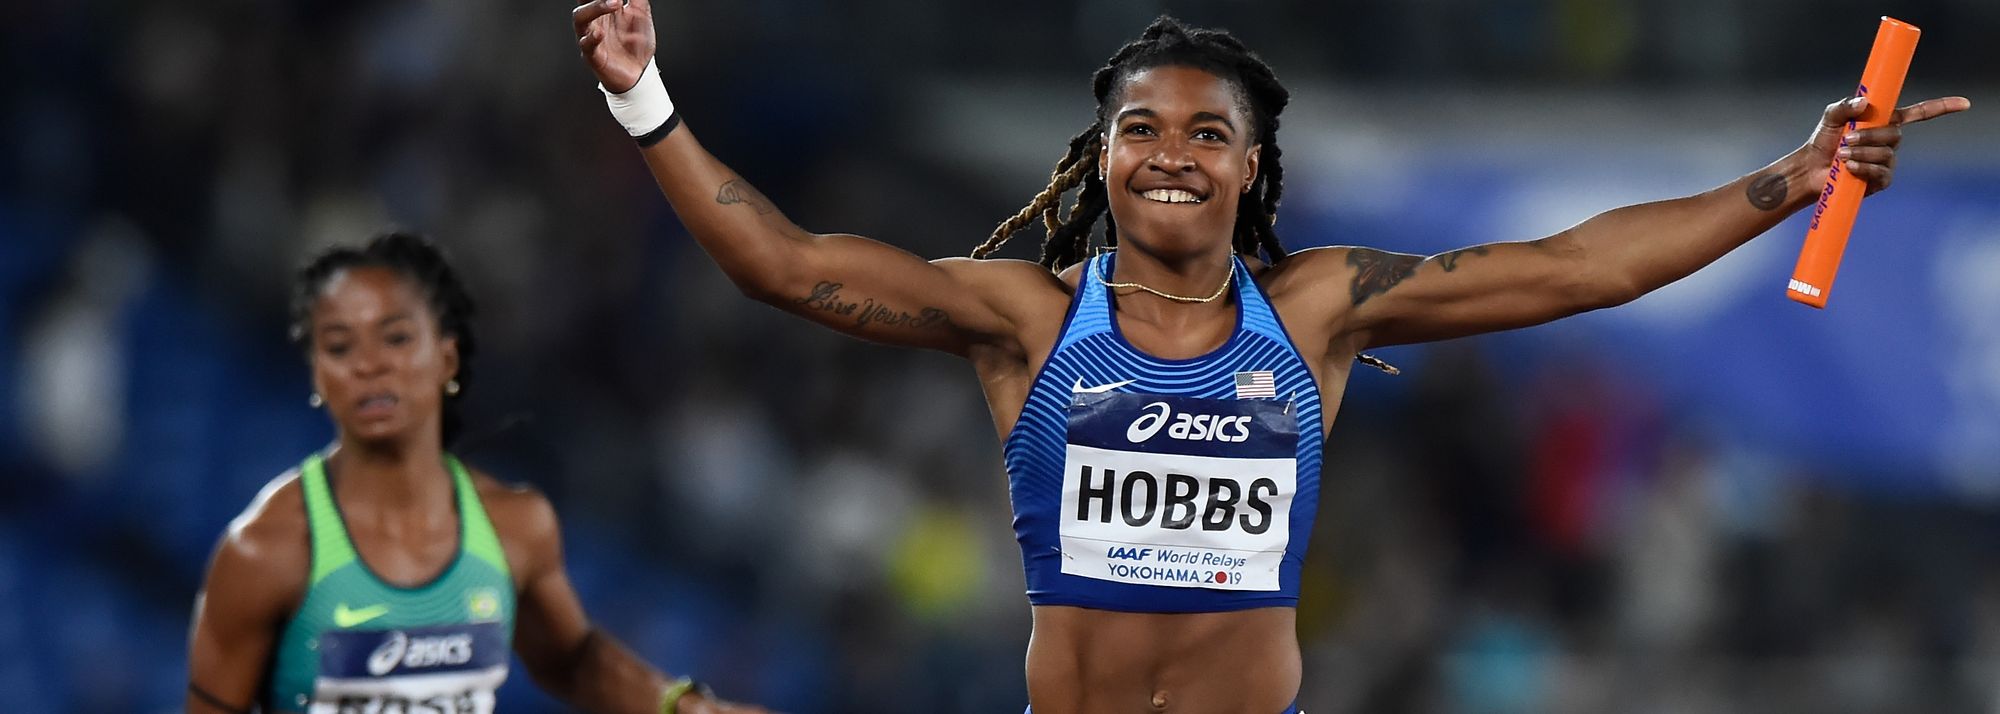 There’s so much to race for at the World Athletics Relays Bahamas 24 and in the women’s 4x100m, athletes from 30 teams will be battling it out for Olympic places, prize money and bragging rights